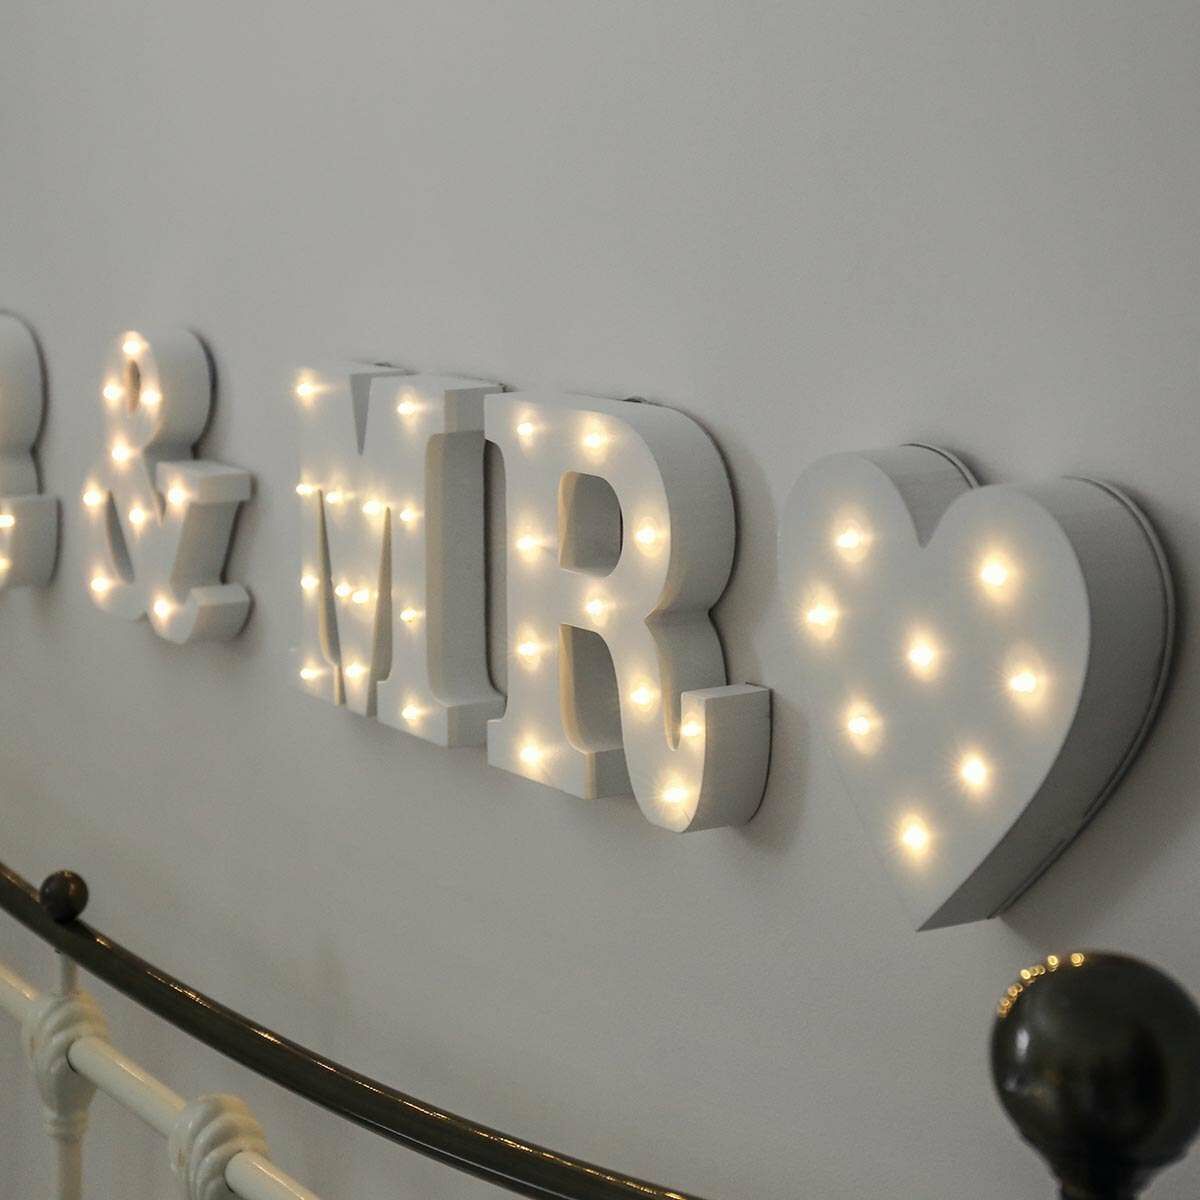 Mr & Mr Battery Light Up Circus Letters, Warm White LEDs image 5